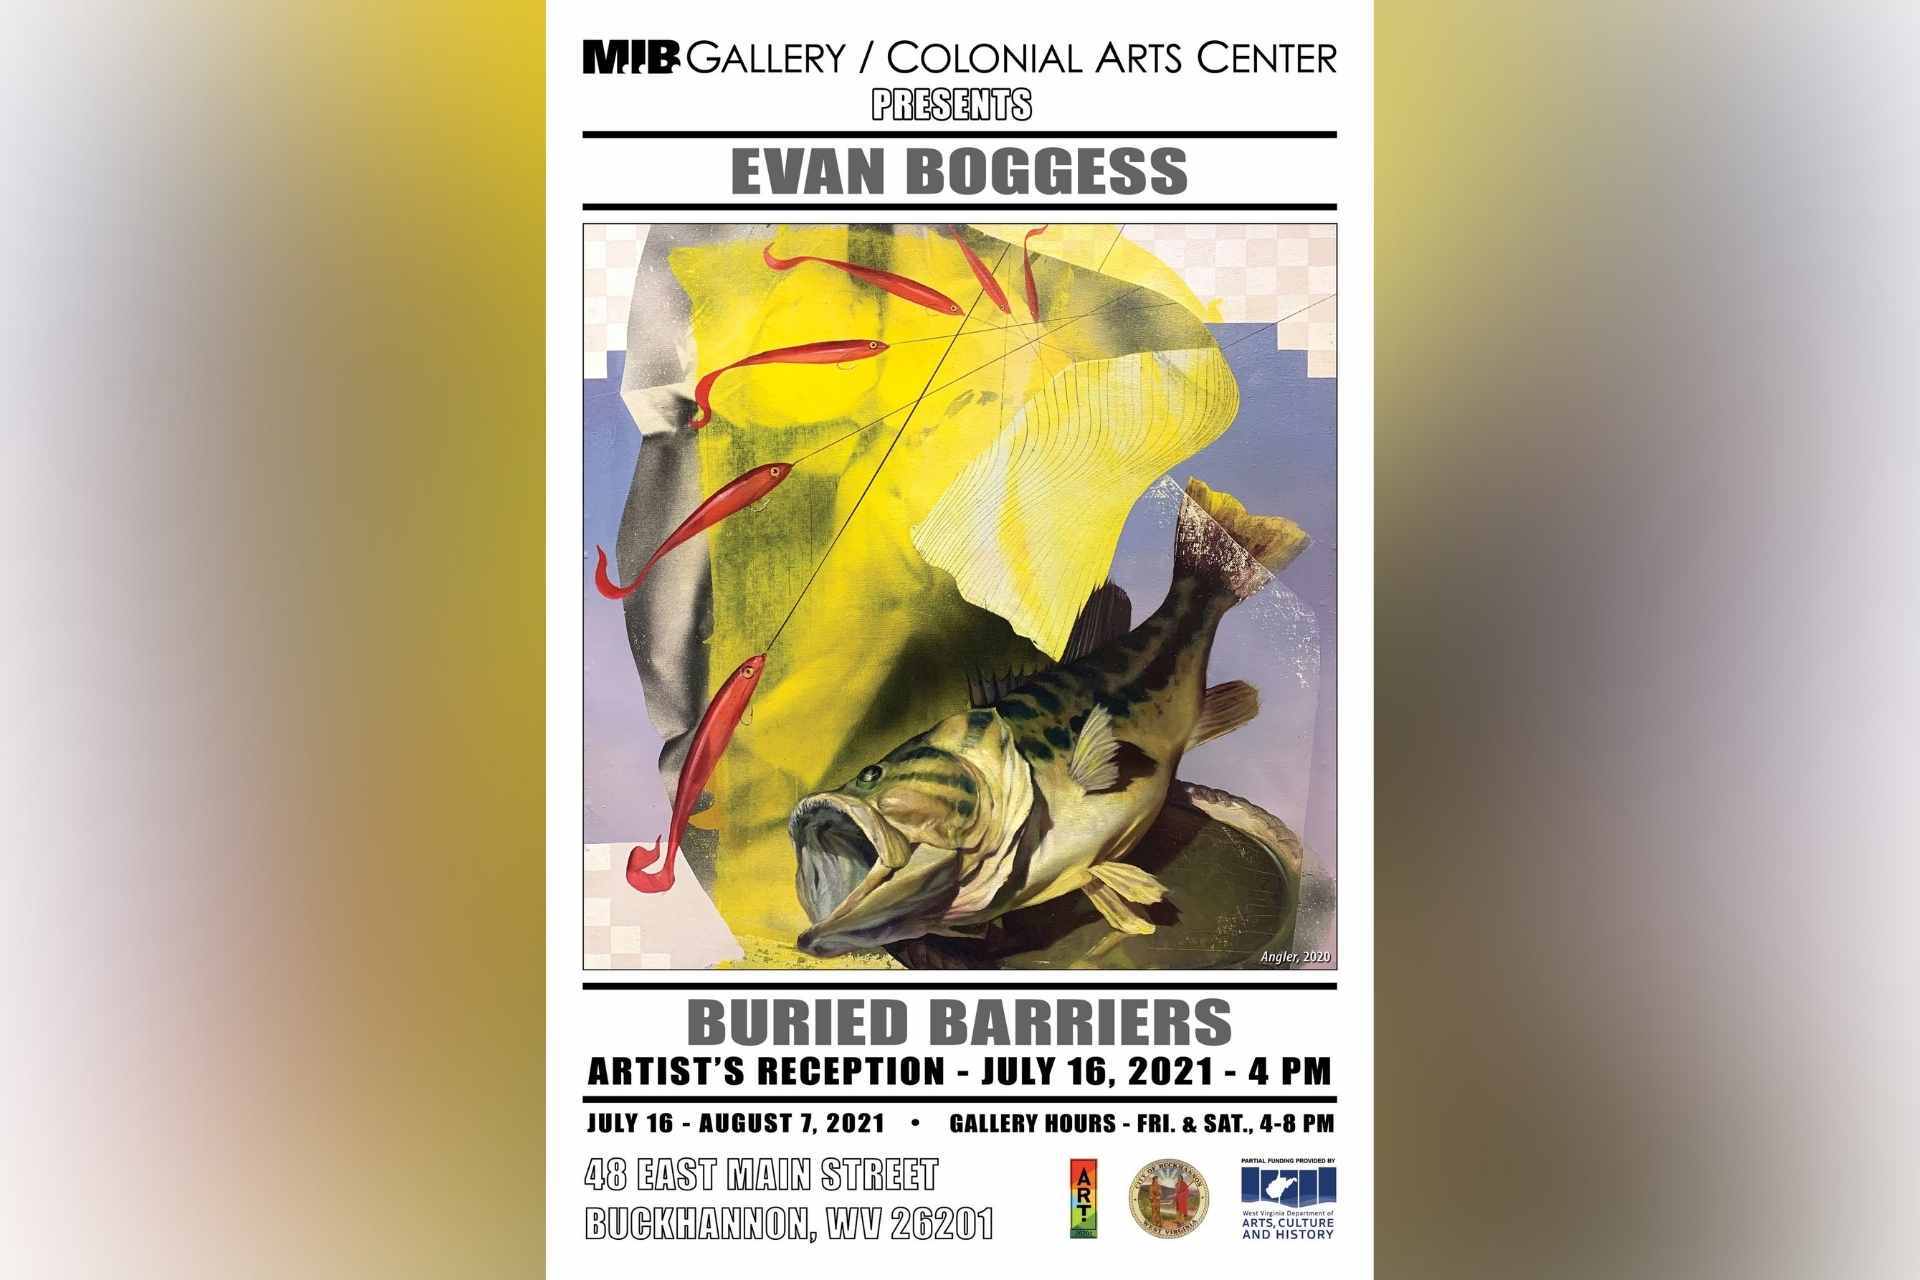 ART26201 to present 'Buried Barriers' exhibit by Evan Boggess at M.I.B.  Gallery